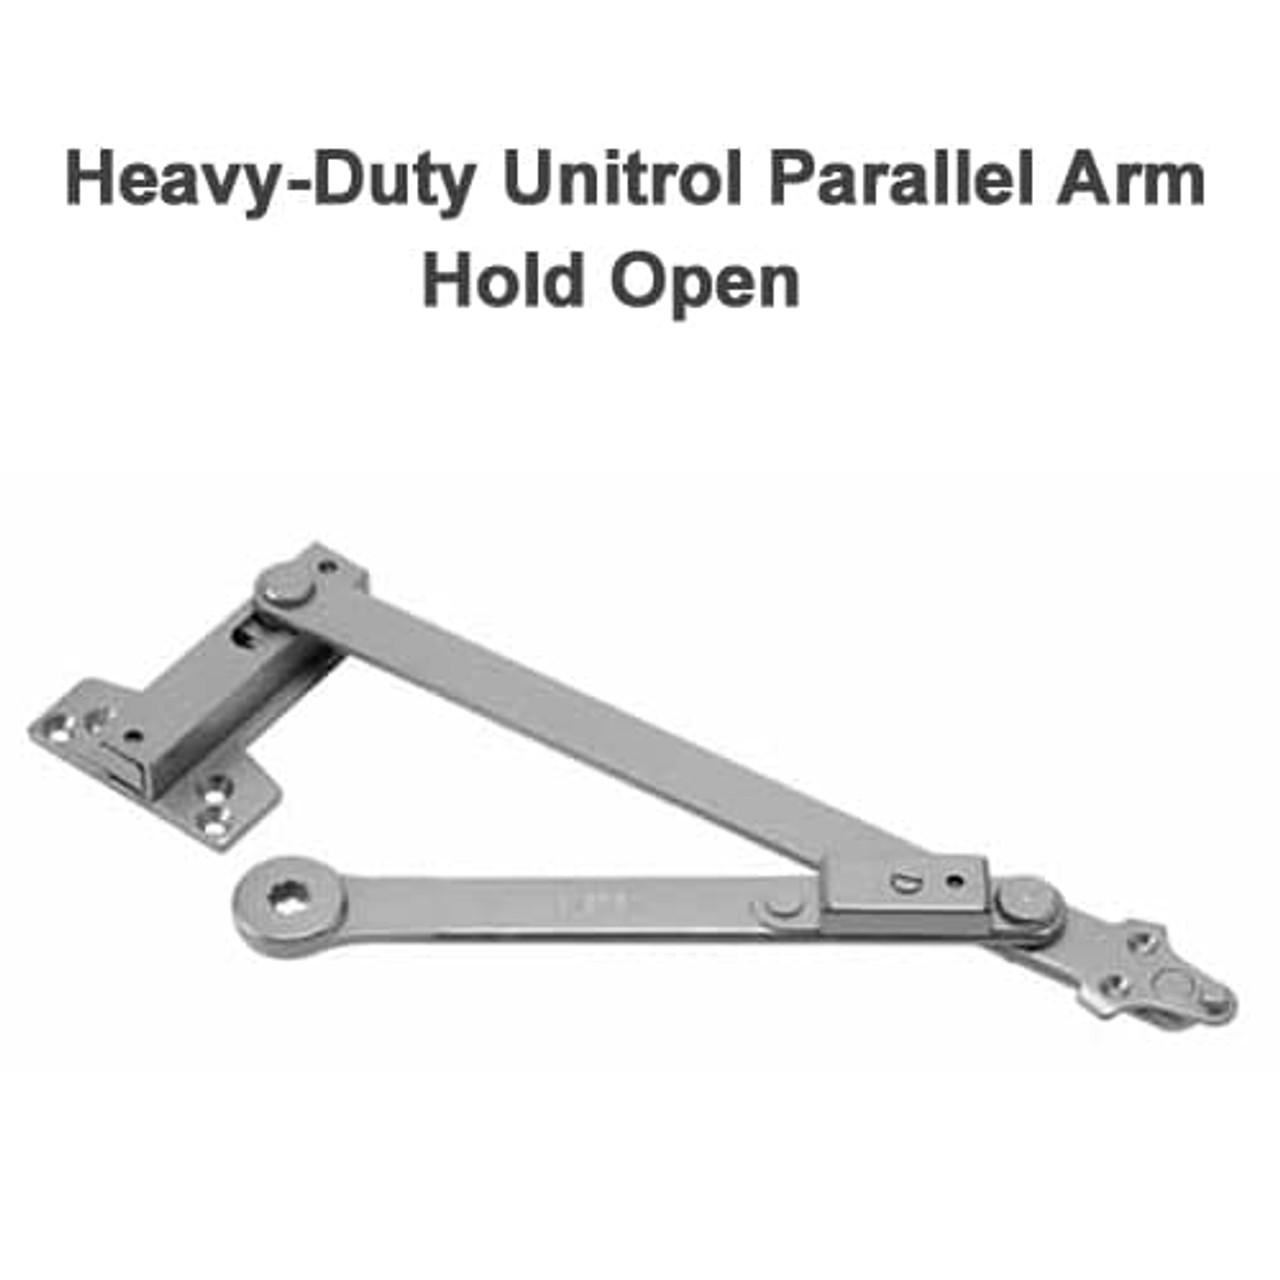 DC6210-A12-690-M54-W42 Corbin 6000 Series Multi-Sized Parallel Arm Door Closers with Heavy-Duty Unitrol with Hold Open in Dark Bronze